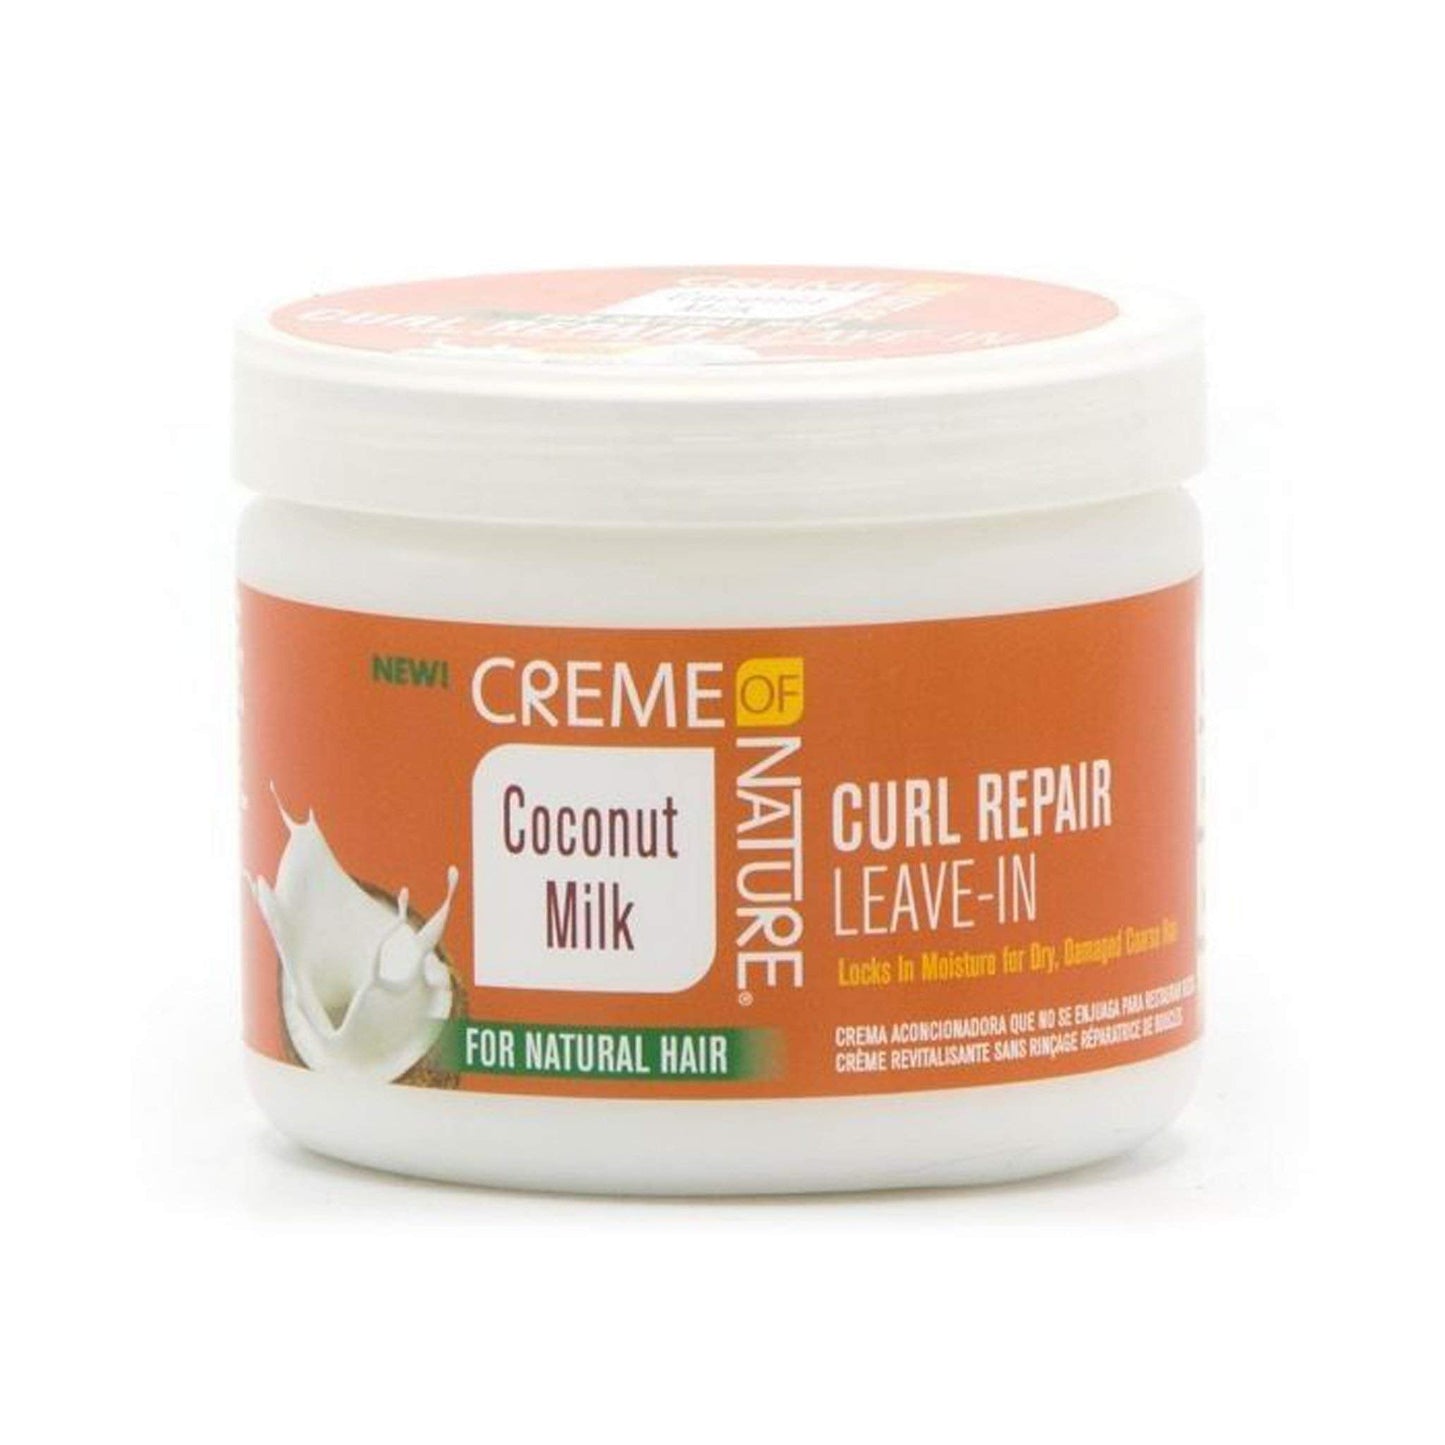 Creme Of Nature - Leave-in repair cream for curls coconut milk (Curl repair leave in) - 326g - Creme of nature - Ethni Beauty Market